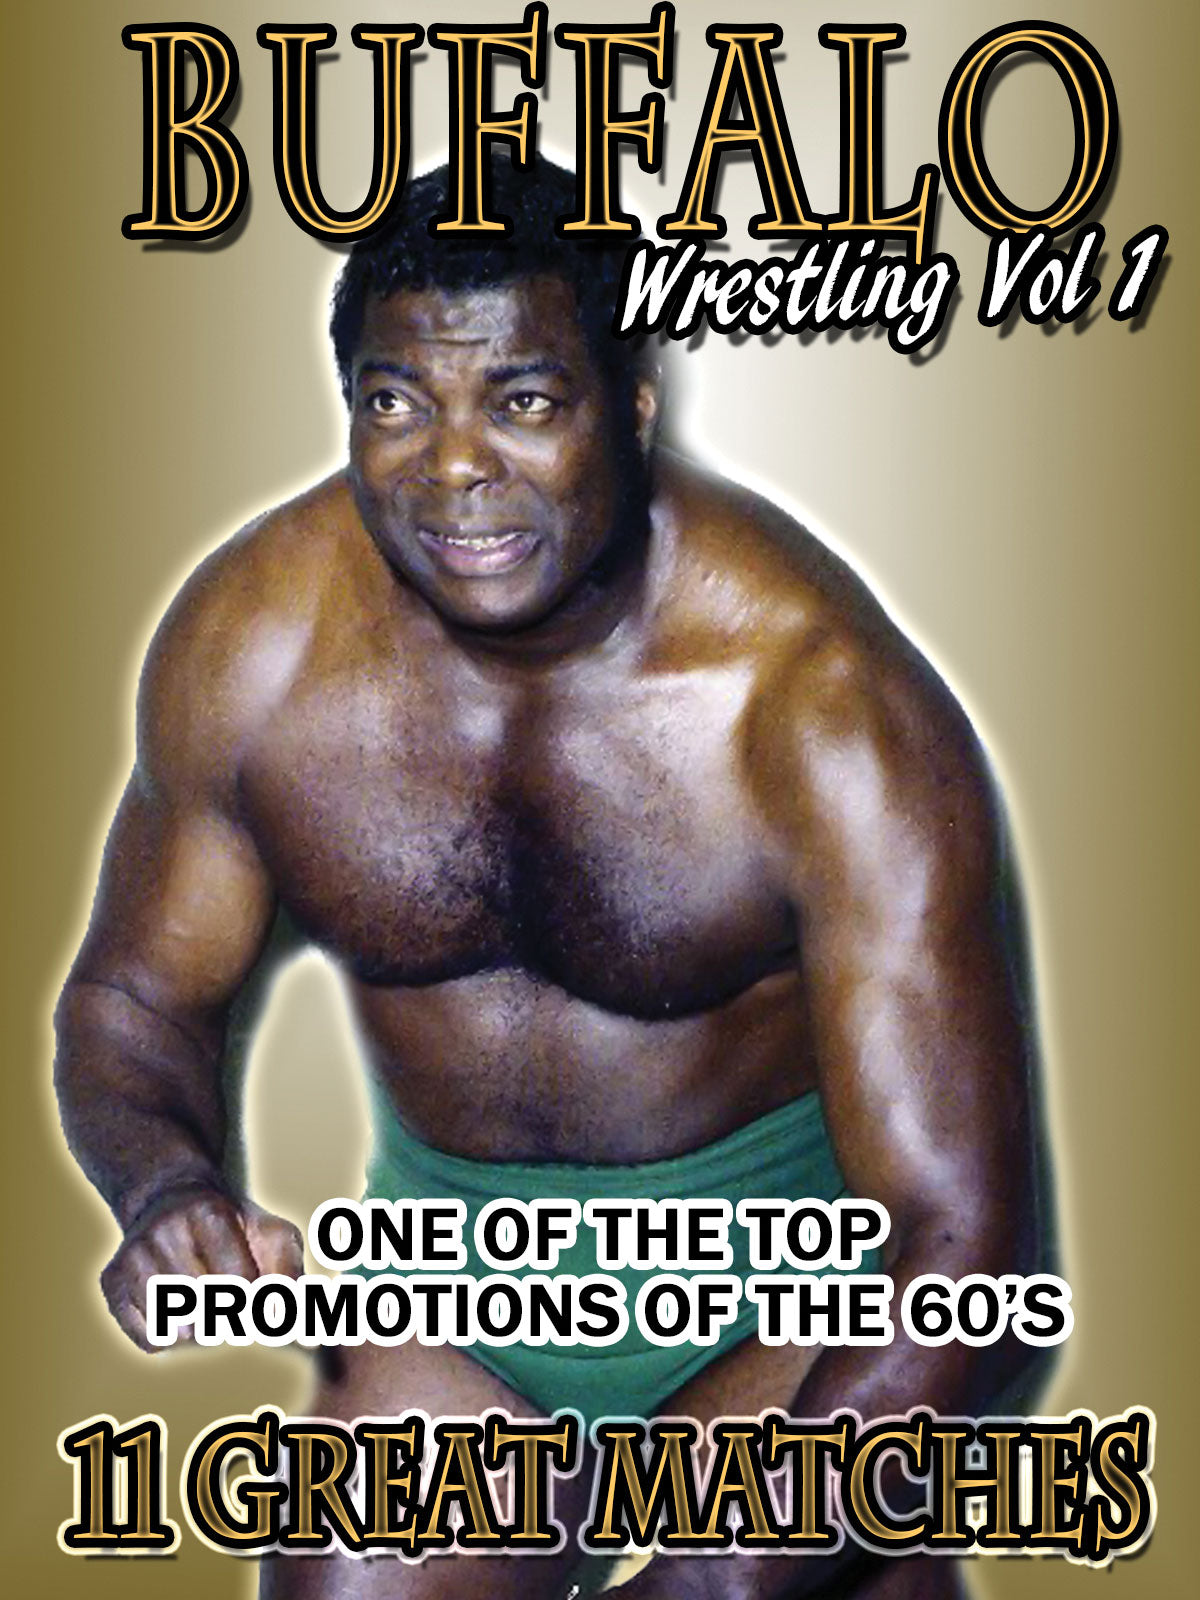 Buffalo Wrestling Vol. 1: 11 Great Matches cover art